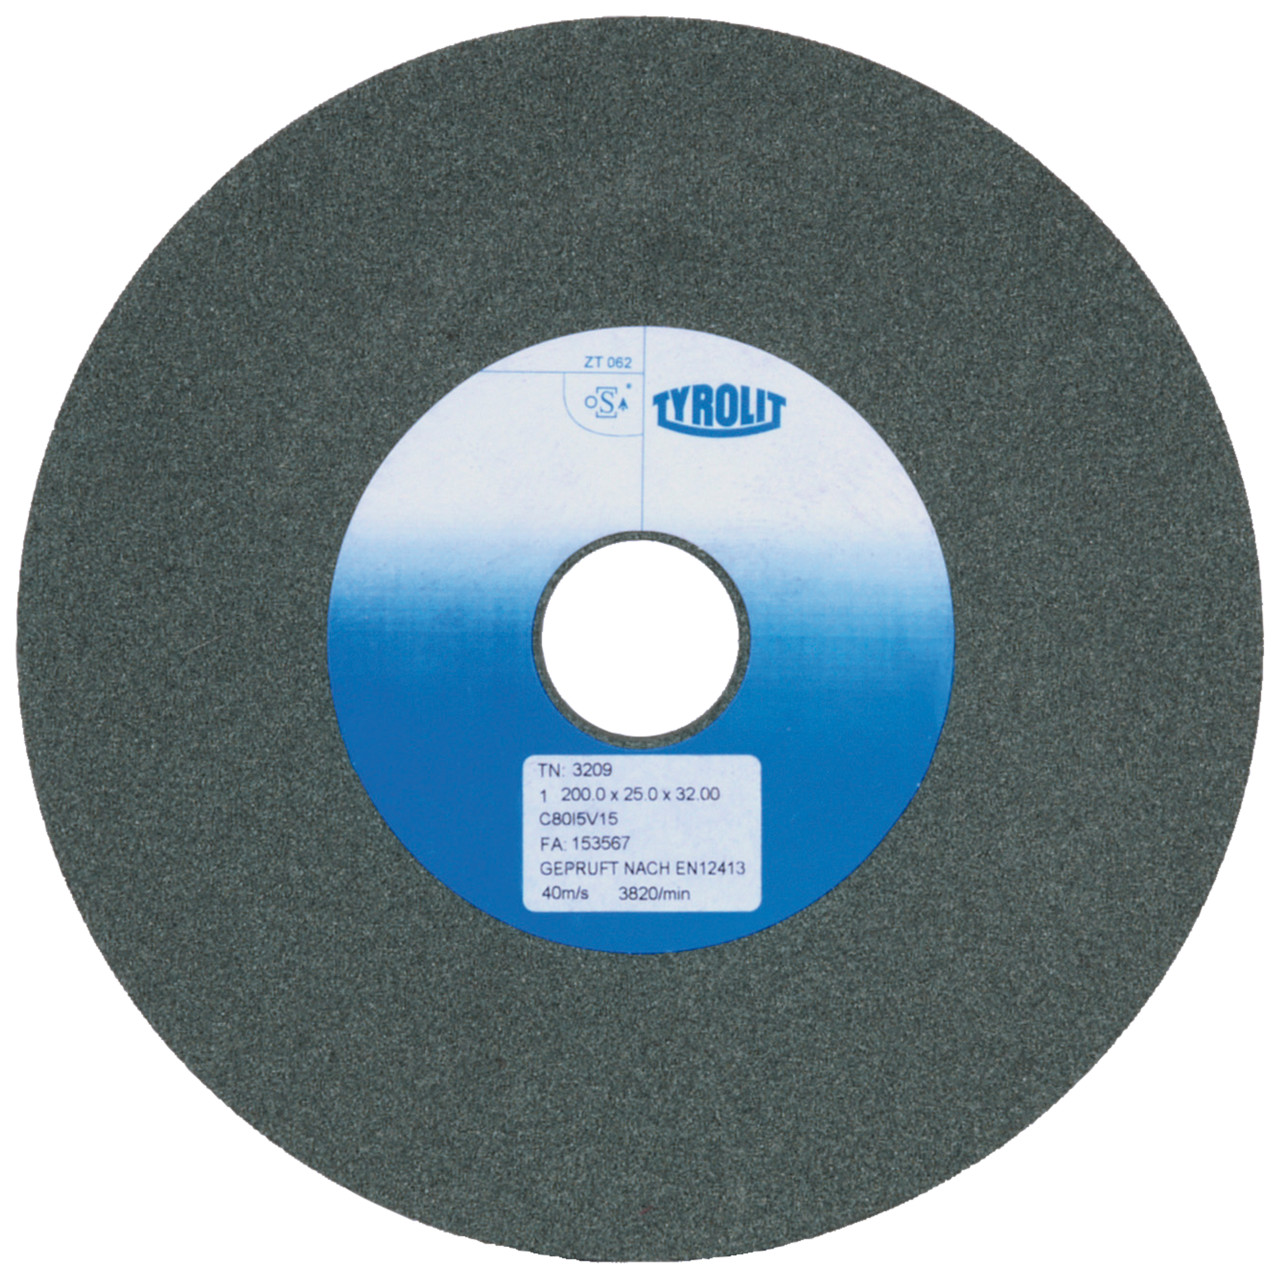 Tyrolit Conventional ceramic grinding discs DxDxH 150x13x25 For carbide and cast iron, shape: 1, Art. 664185